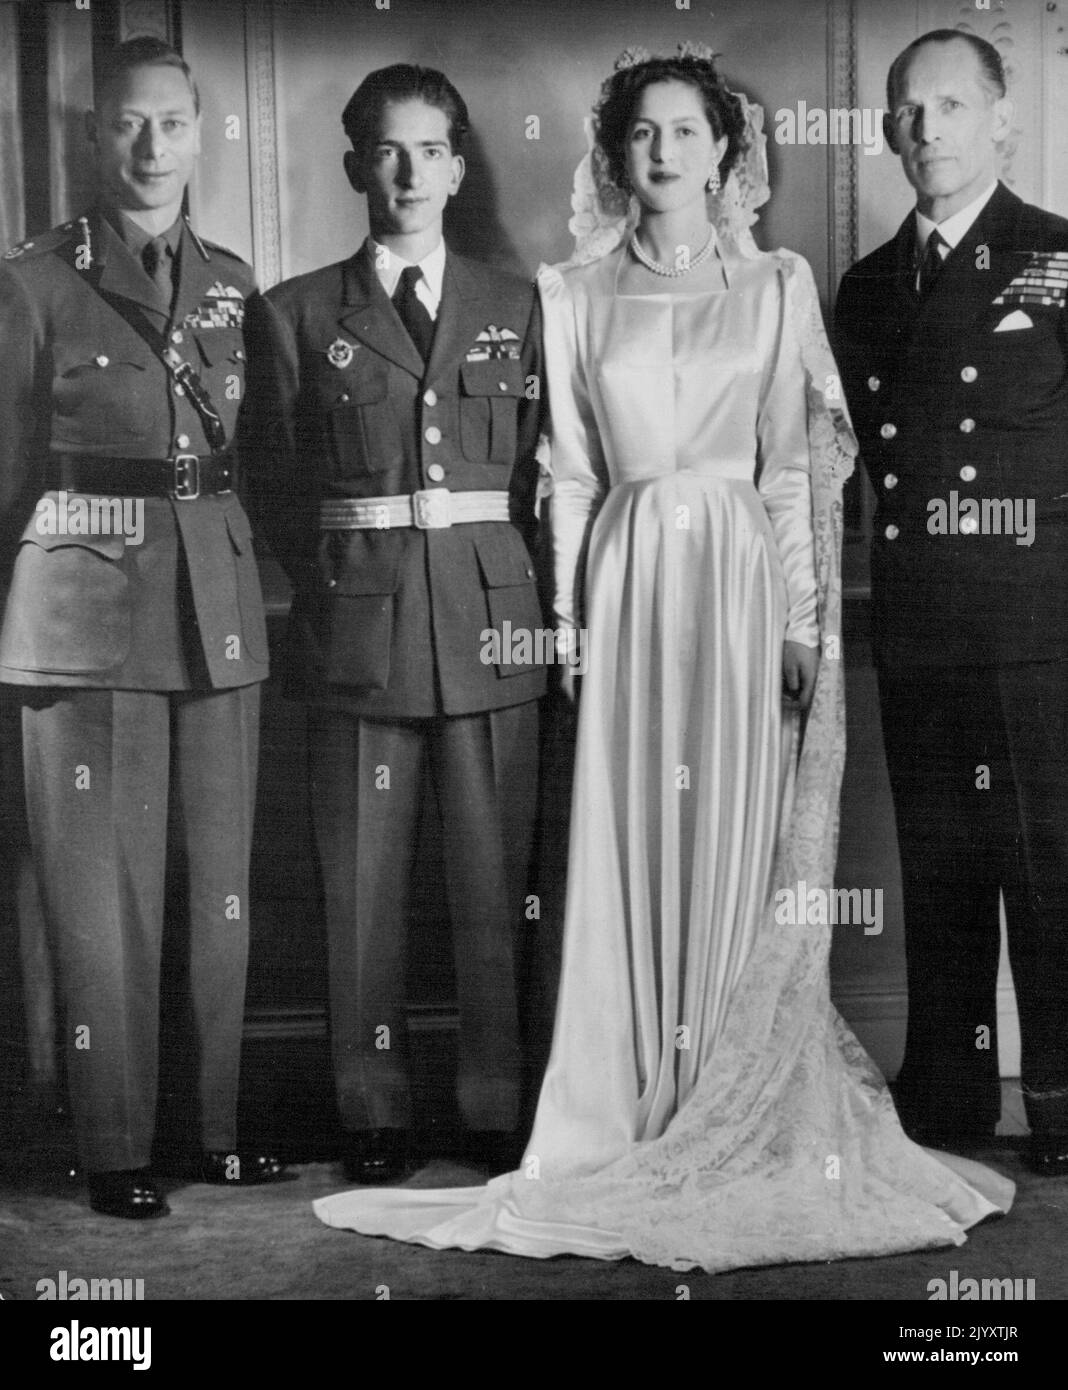 King Peter's Wedding Our Photograph was made in London on the occasion of the wedding of King Peter of Yugoslavia to Princess Alexander of Greece. Left to Right: King George VI of England, the King Peter, Princess Alexandra and King George of the Hellenes. June 6, 1944. (Photo by European) Stock Photo